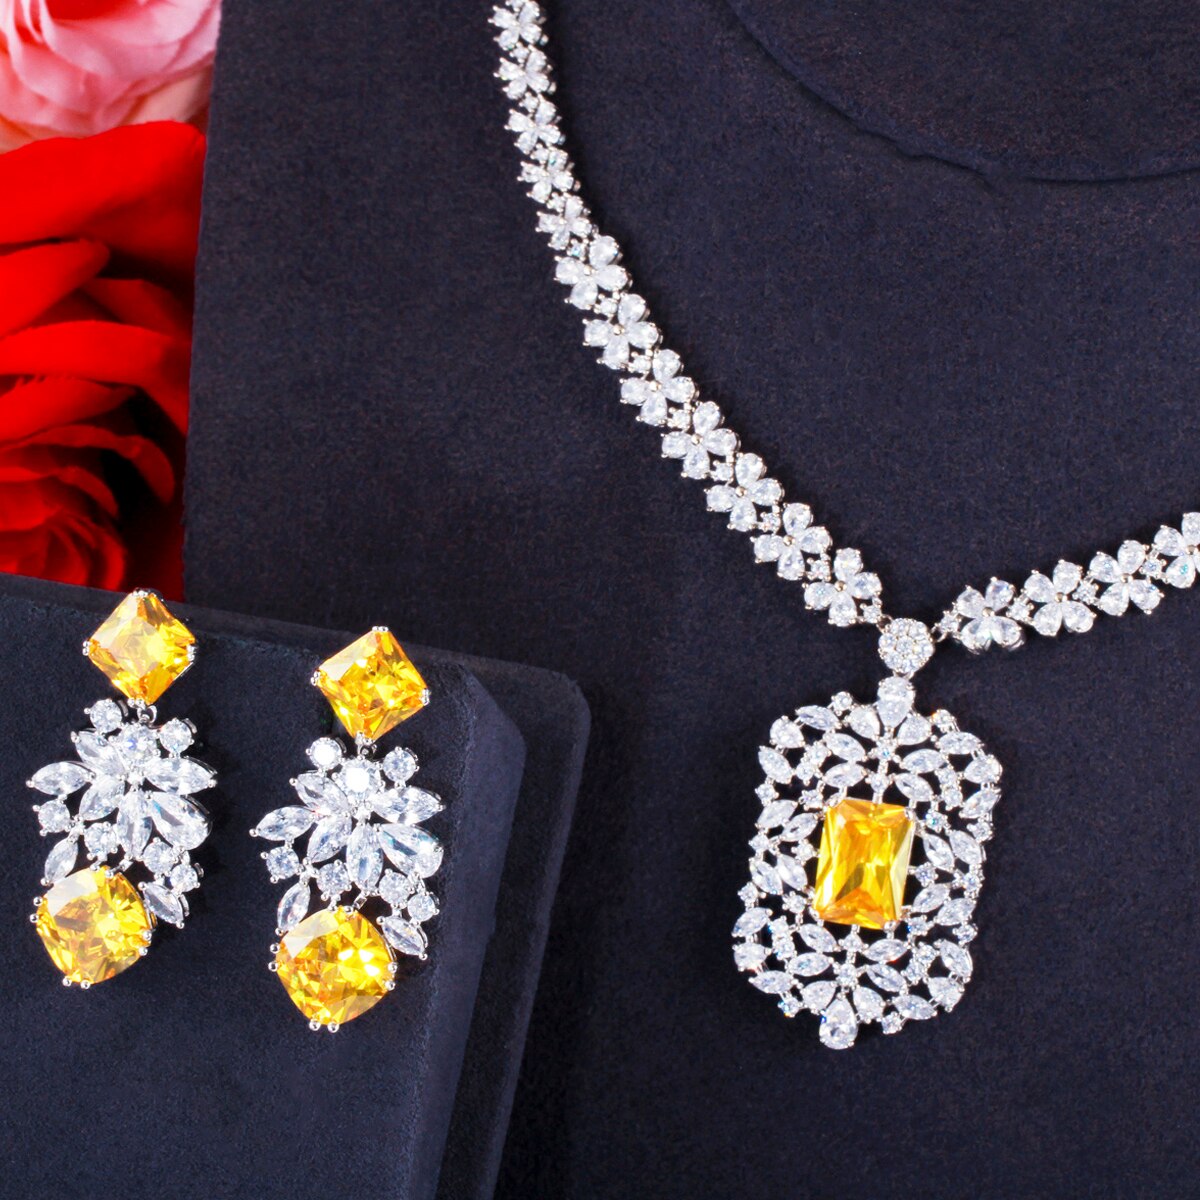 ThreeGraces-Elegant-Yellow-Square-Cubic-Zirconia-Crystal-Silver-Color-Bridal-Wedding-Jewelry-Sets-fo-1005001809304666-4